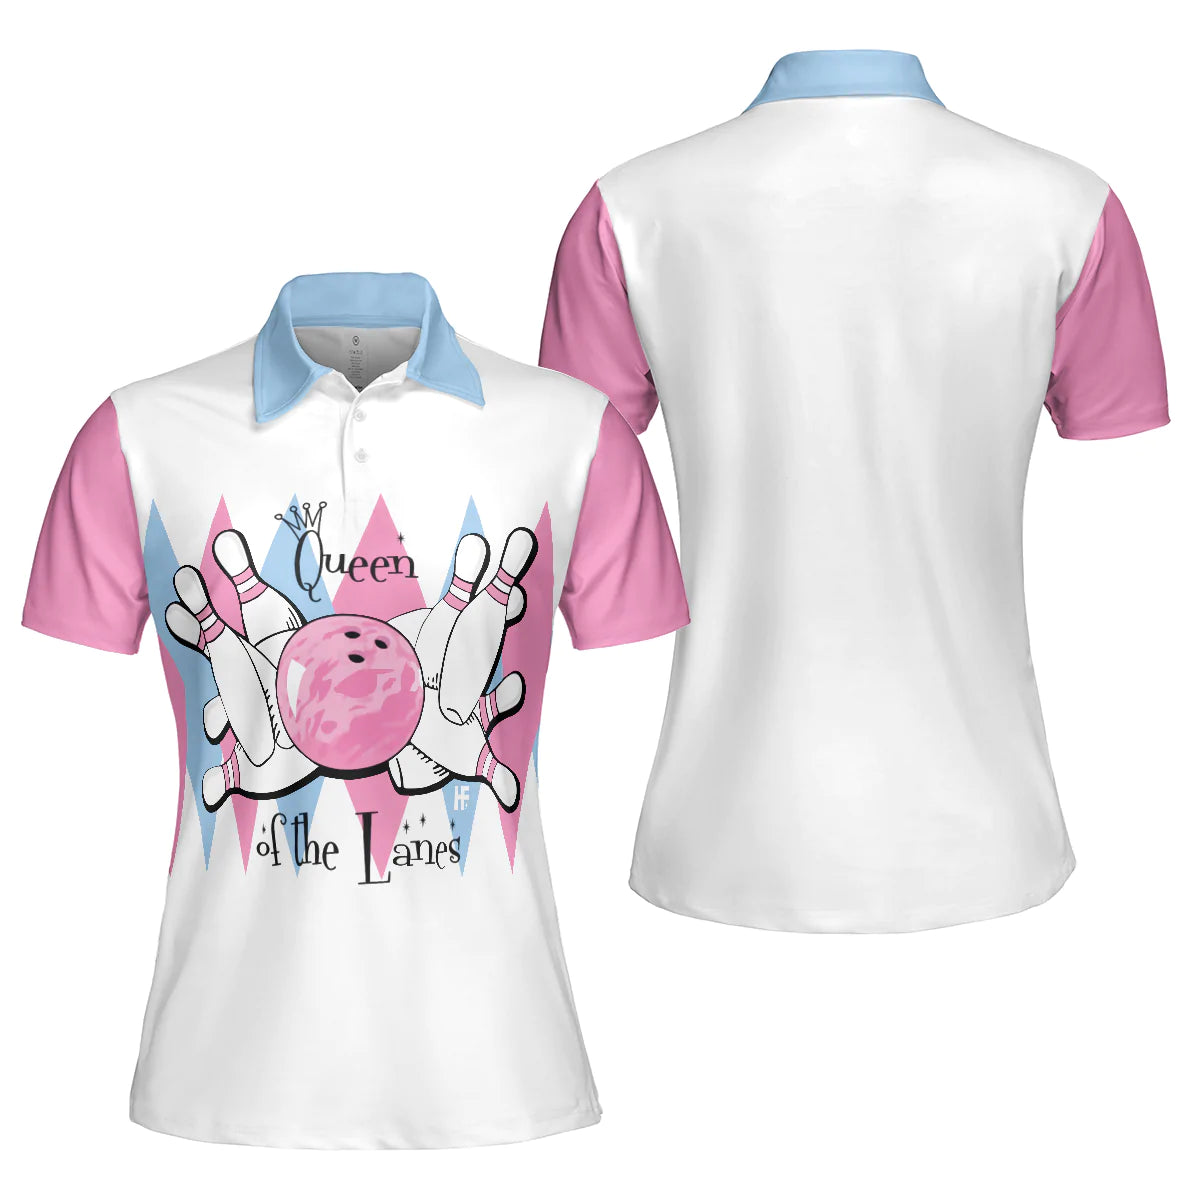 Queen Of The Lanes Pink And Blue Bowling Short Sleeve Women Polo Shirt, Bowling Shirt For Ladies - Best Bowling Gift For Women